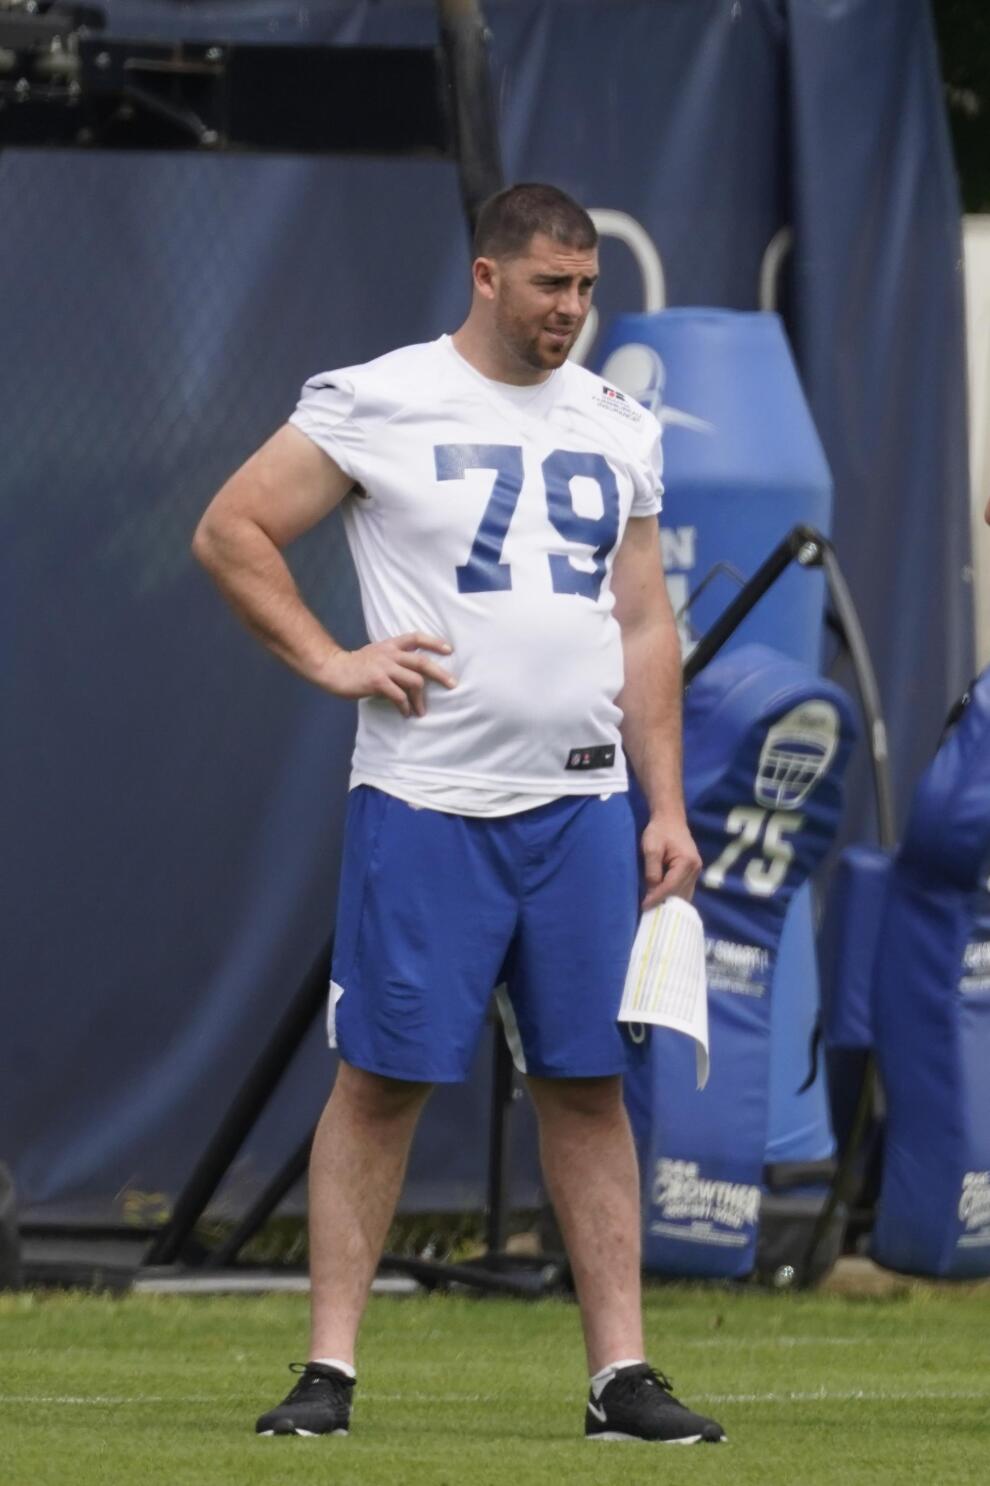 Fisher eager to move beyond Achilles injury, play for Colts